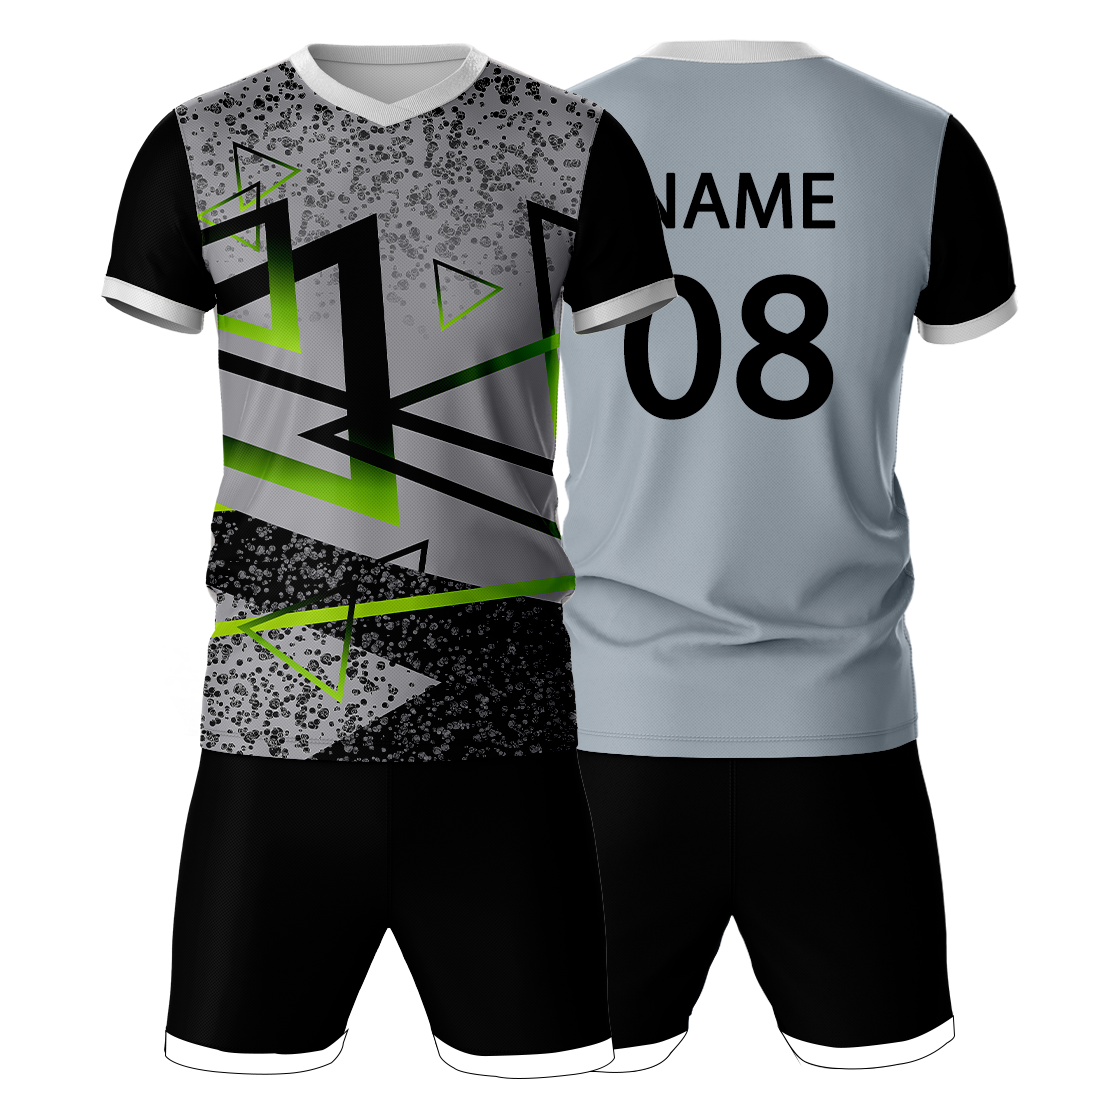 All Over Printed Jersey With Shorts Name & Number Printed.NP50000667